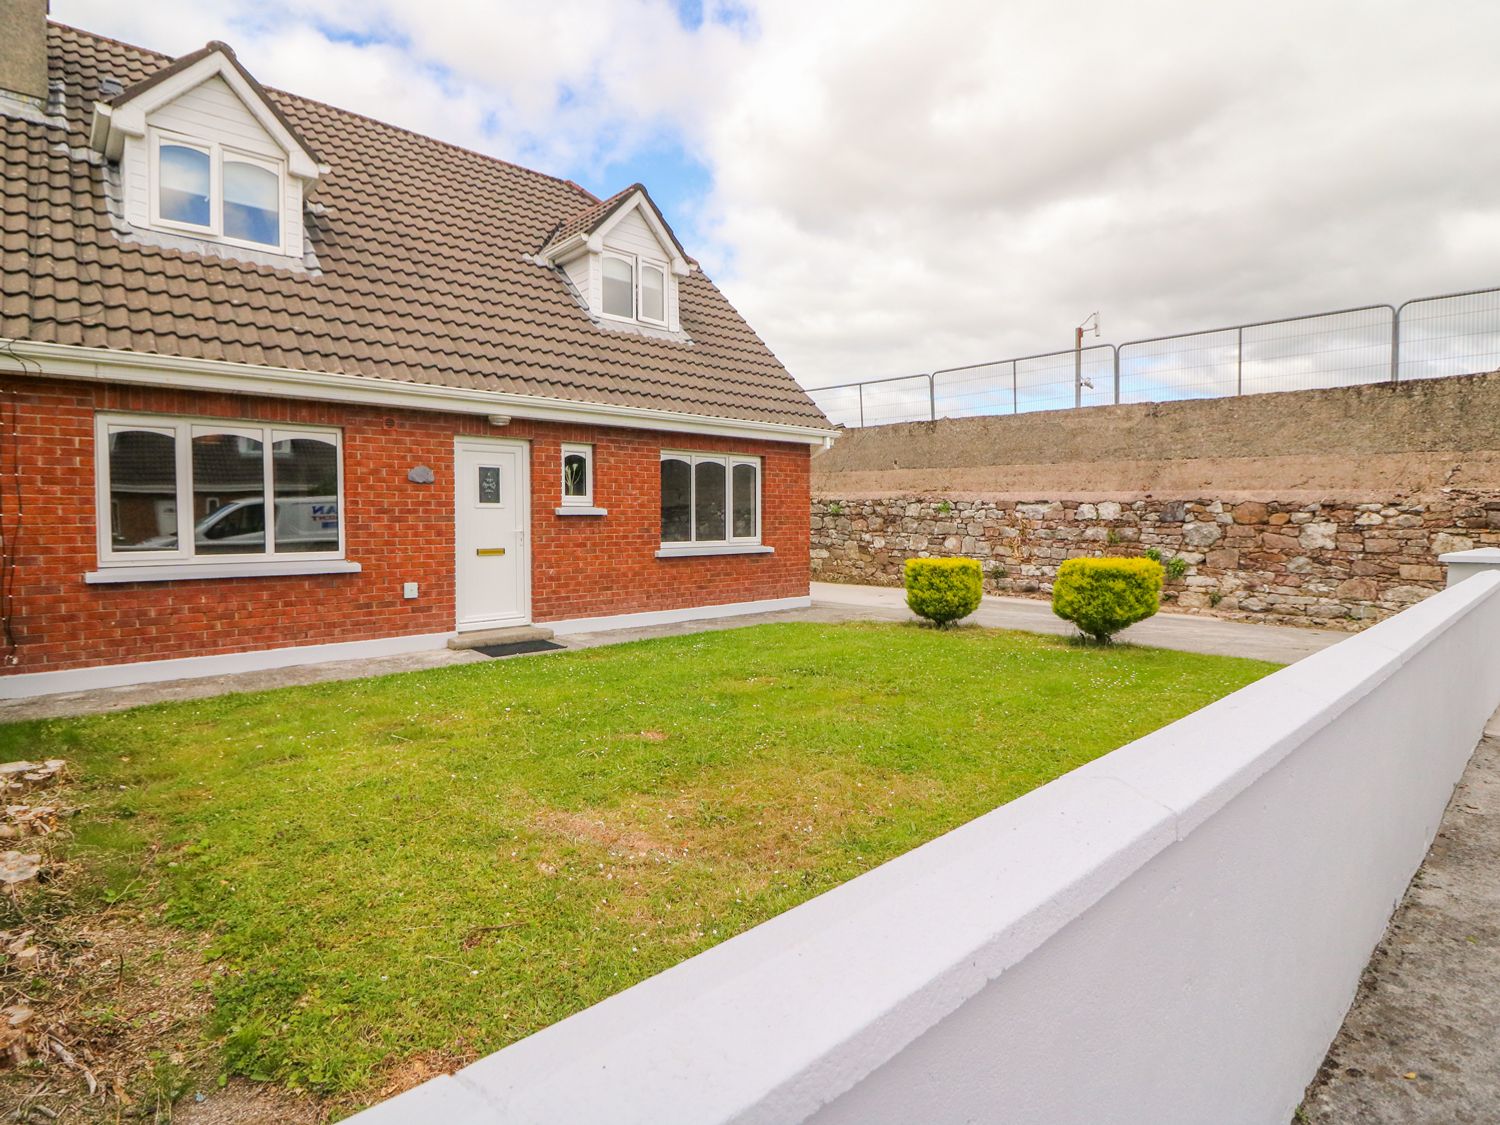 38 Castlewood Park - County Kerry - 1008487 - photo 1